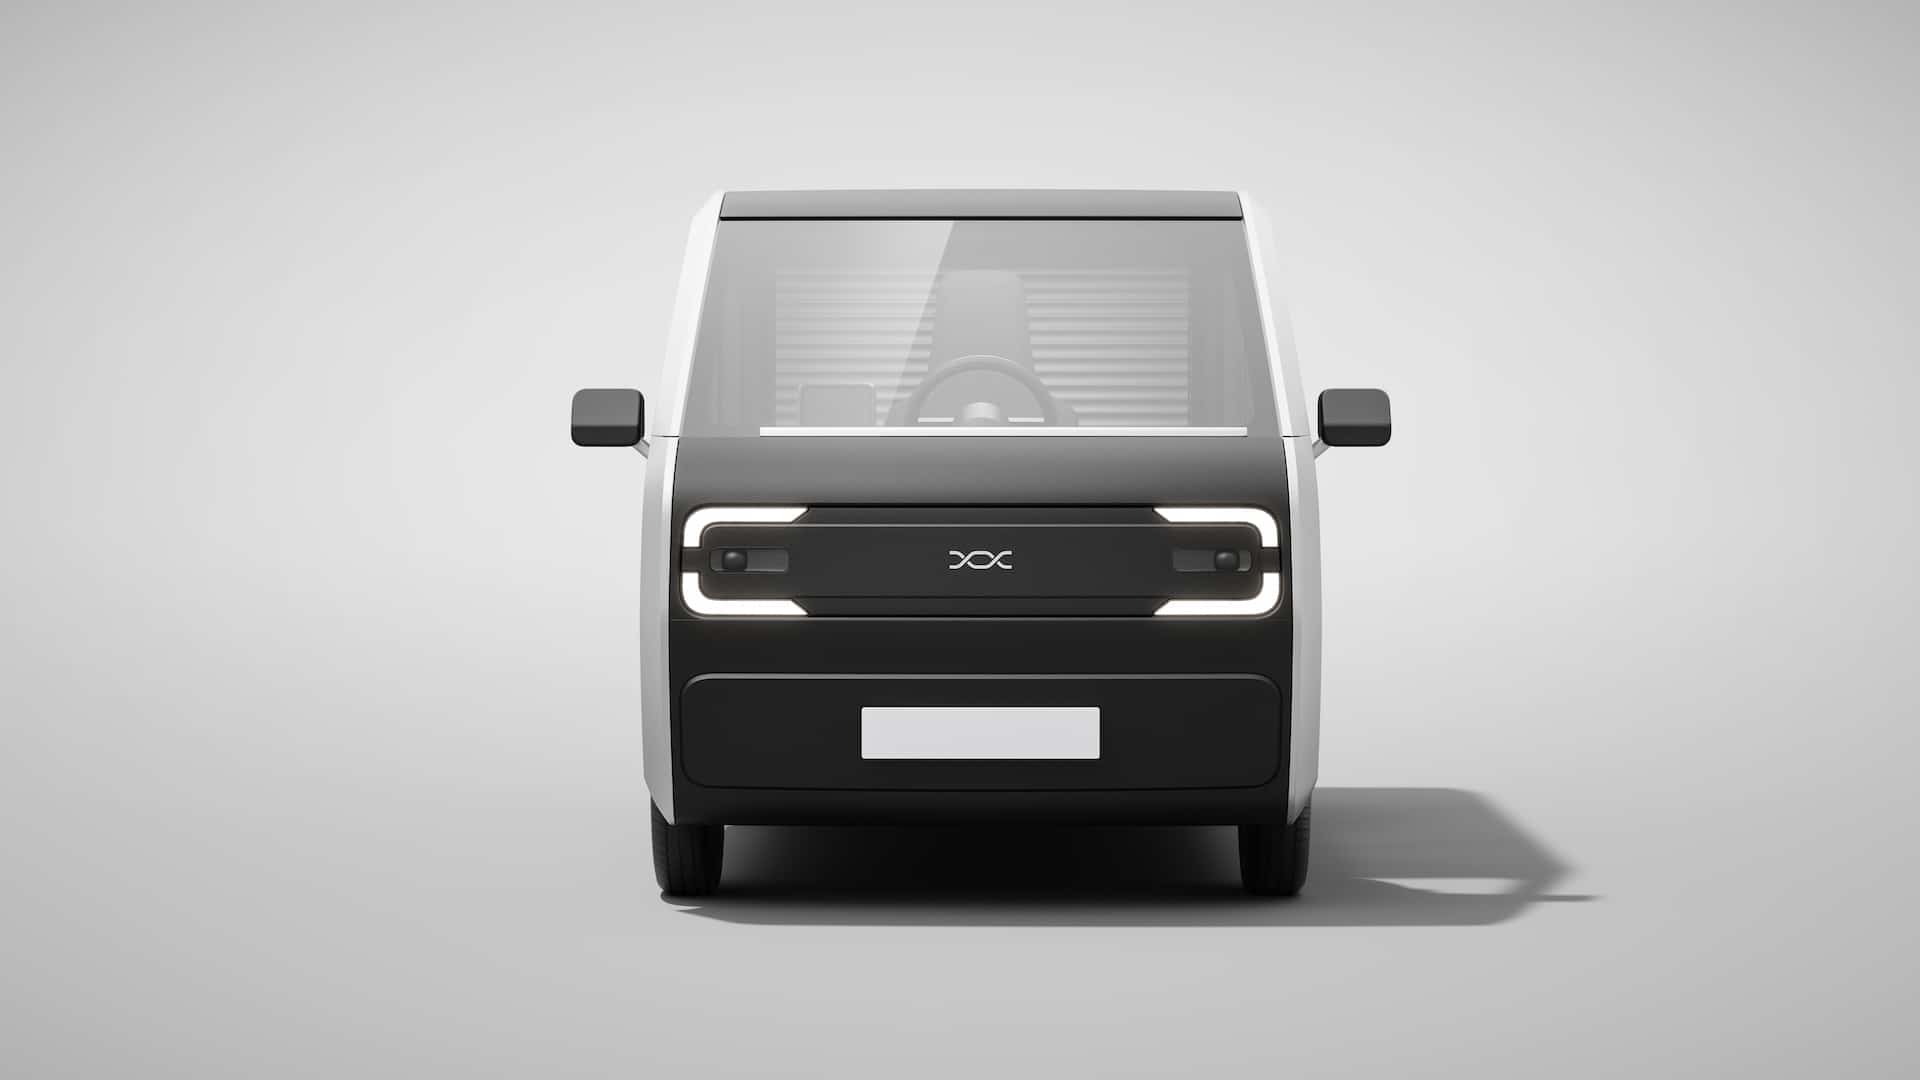 UK-based Helixx Launches Affordable Mini Commercial EVs